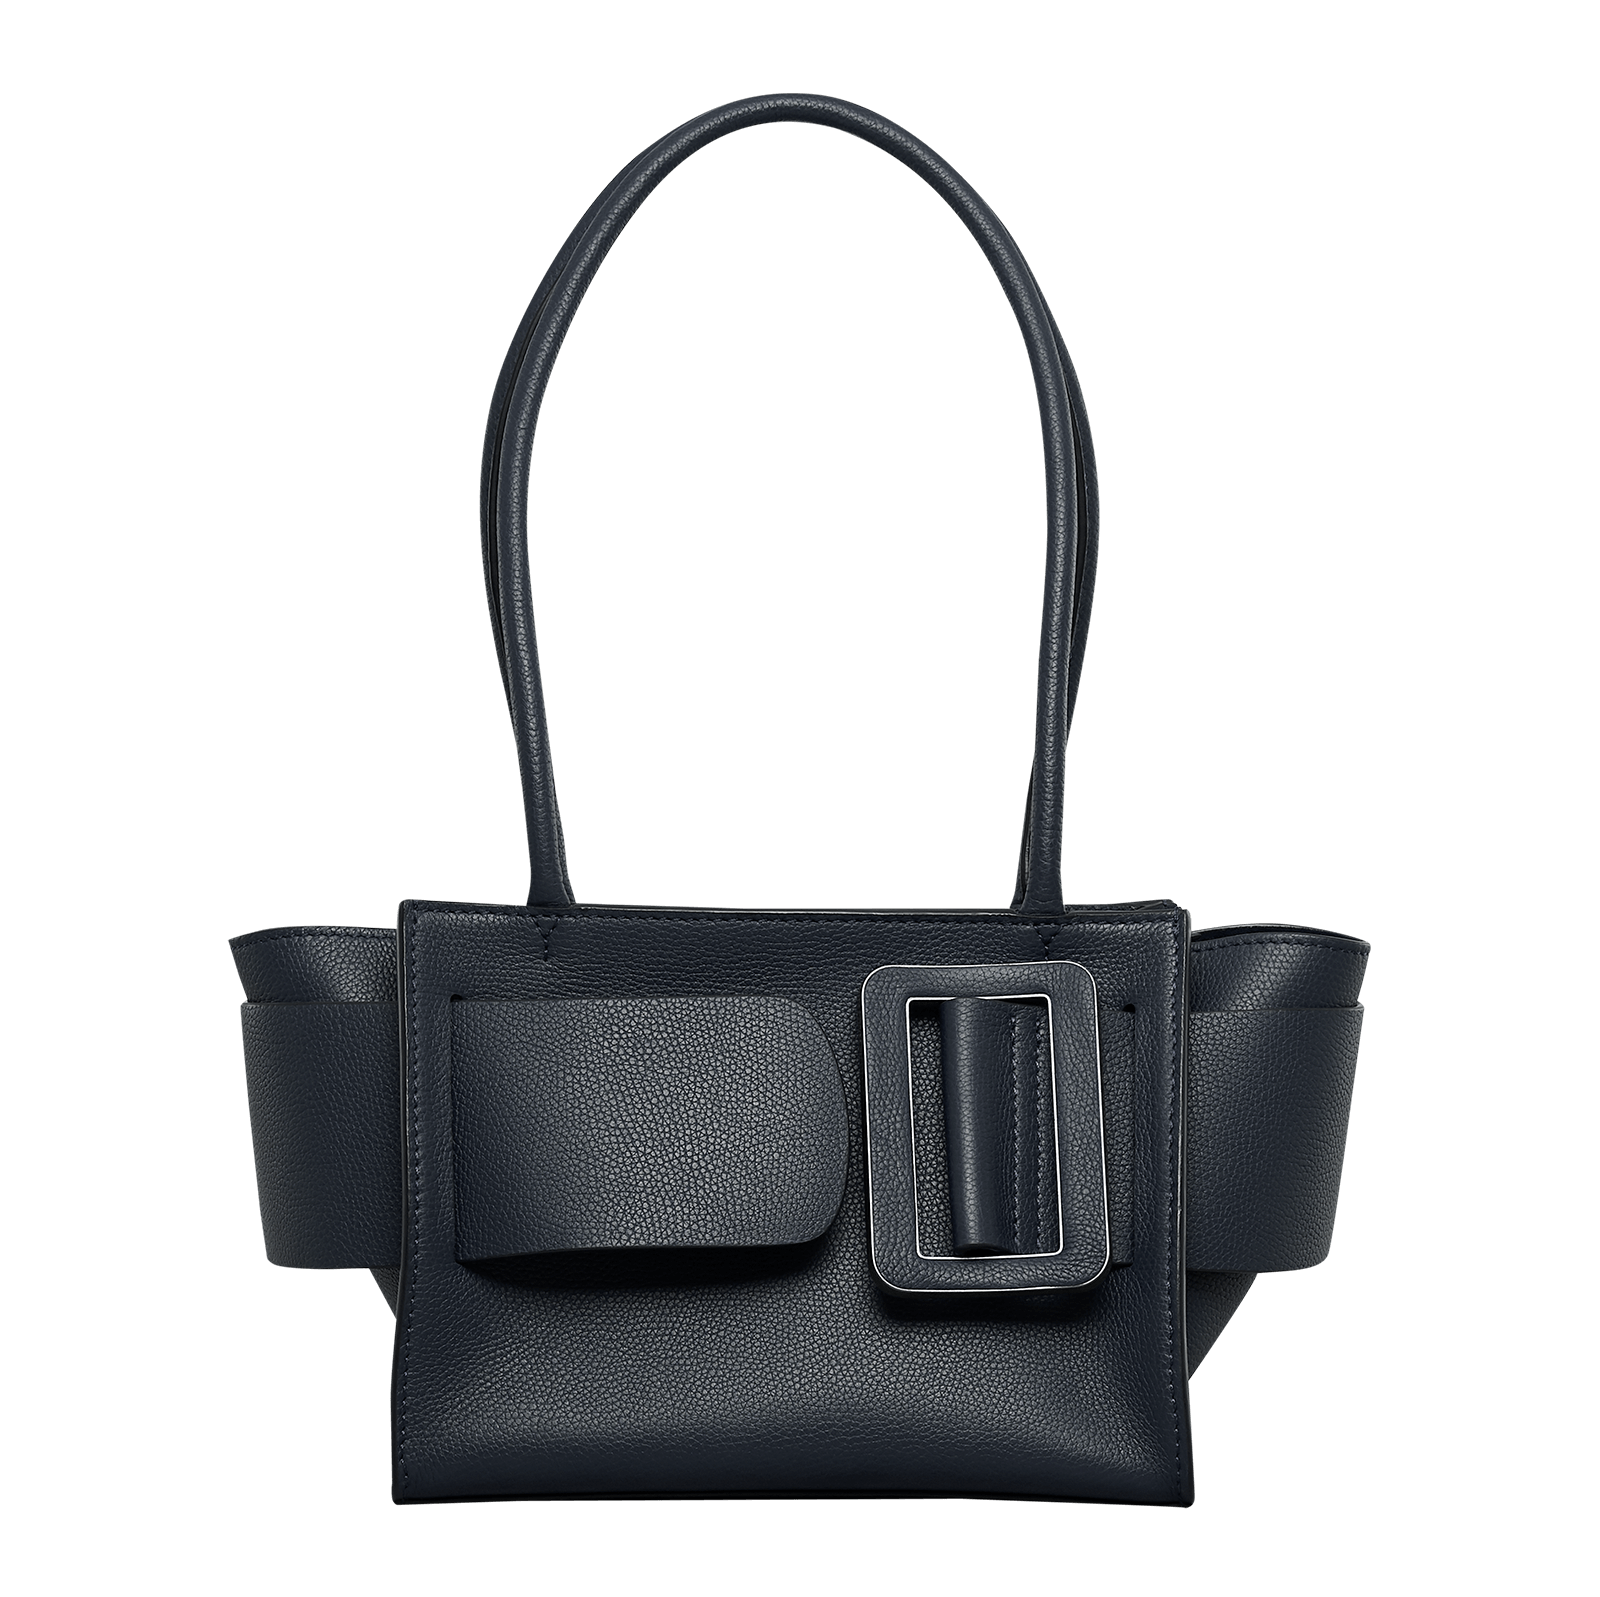 Open, blue, natural grain leather handbag with an oversized buckle on the front, twin carry handles and a top zip fastener.